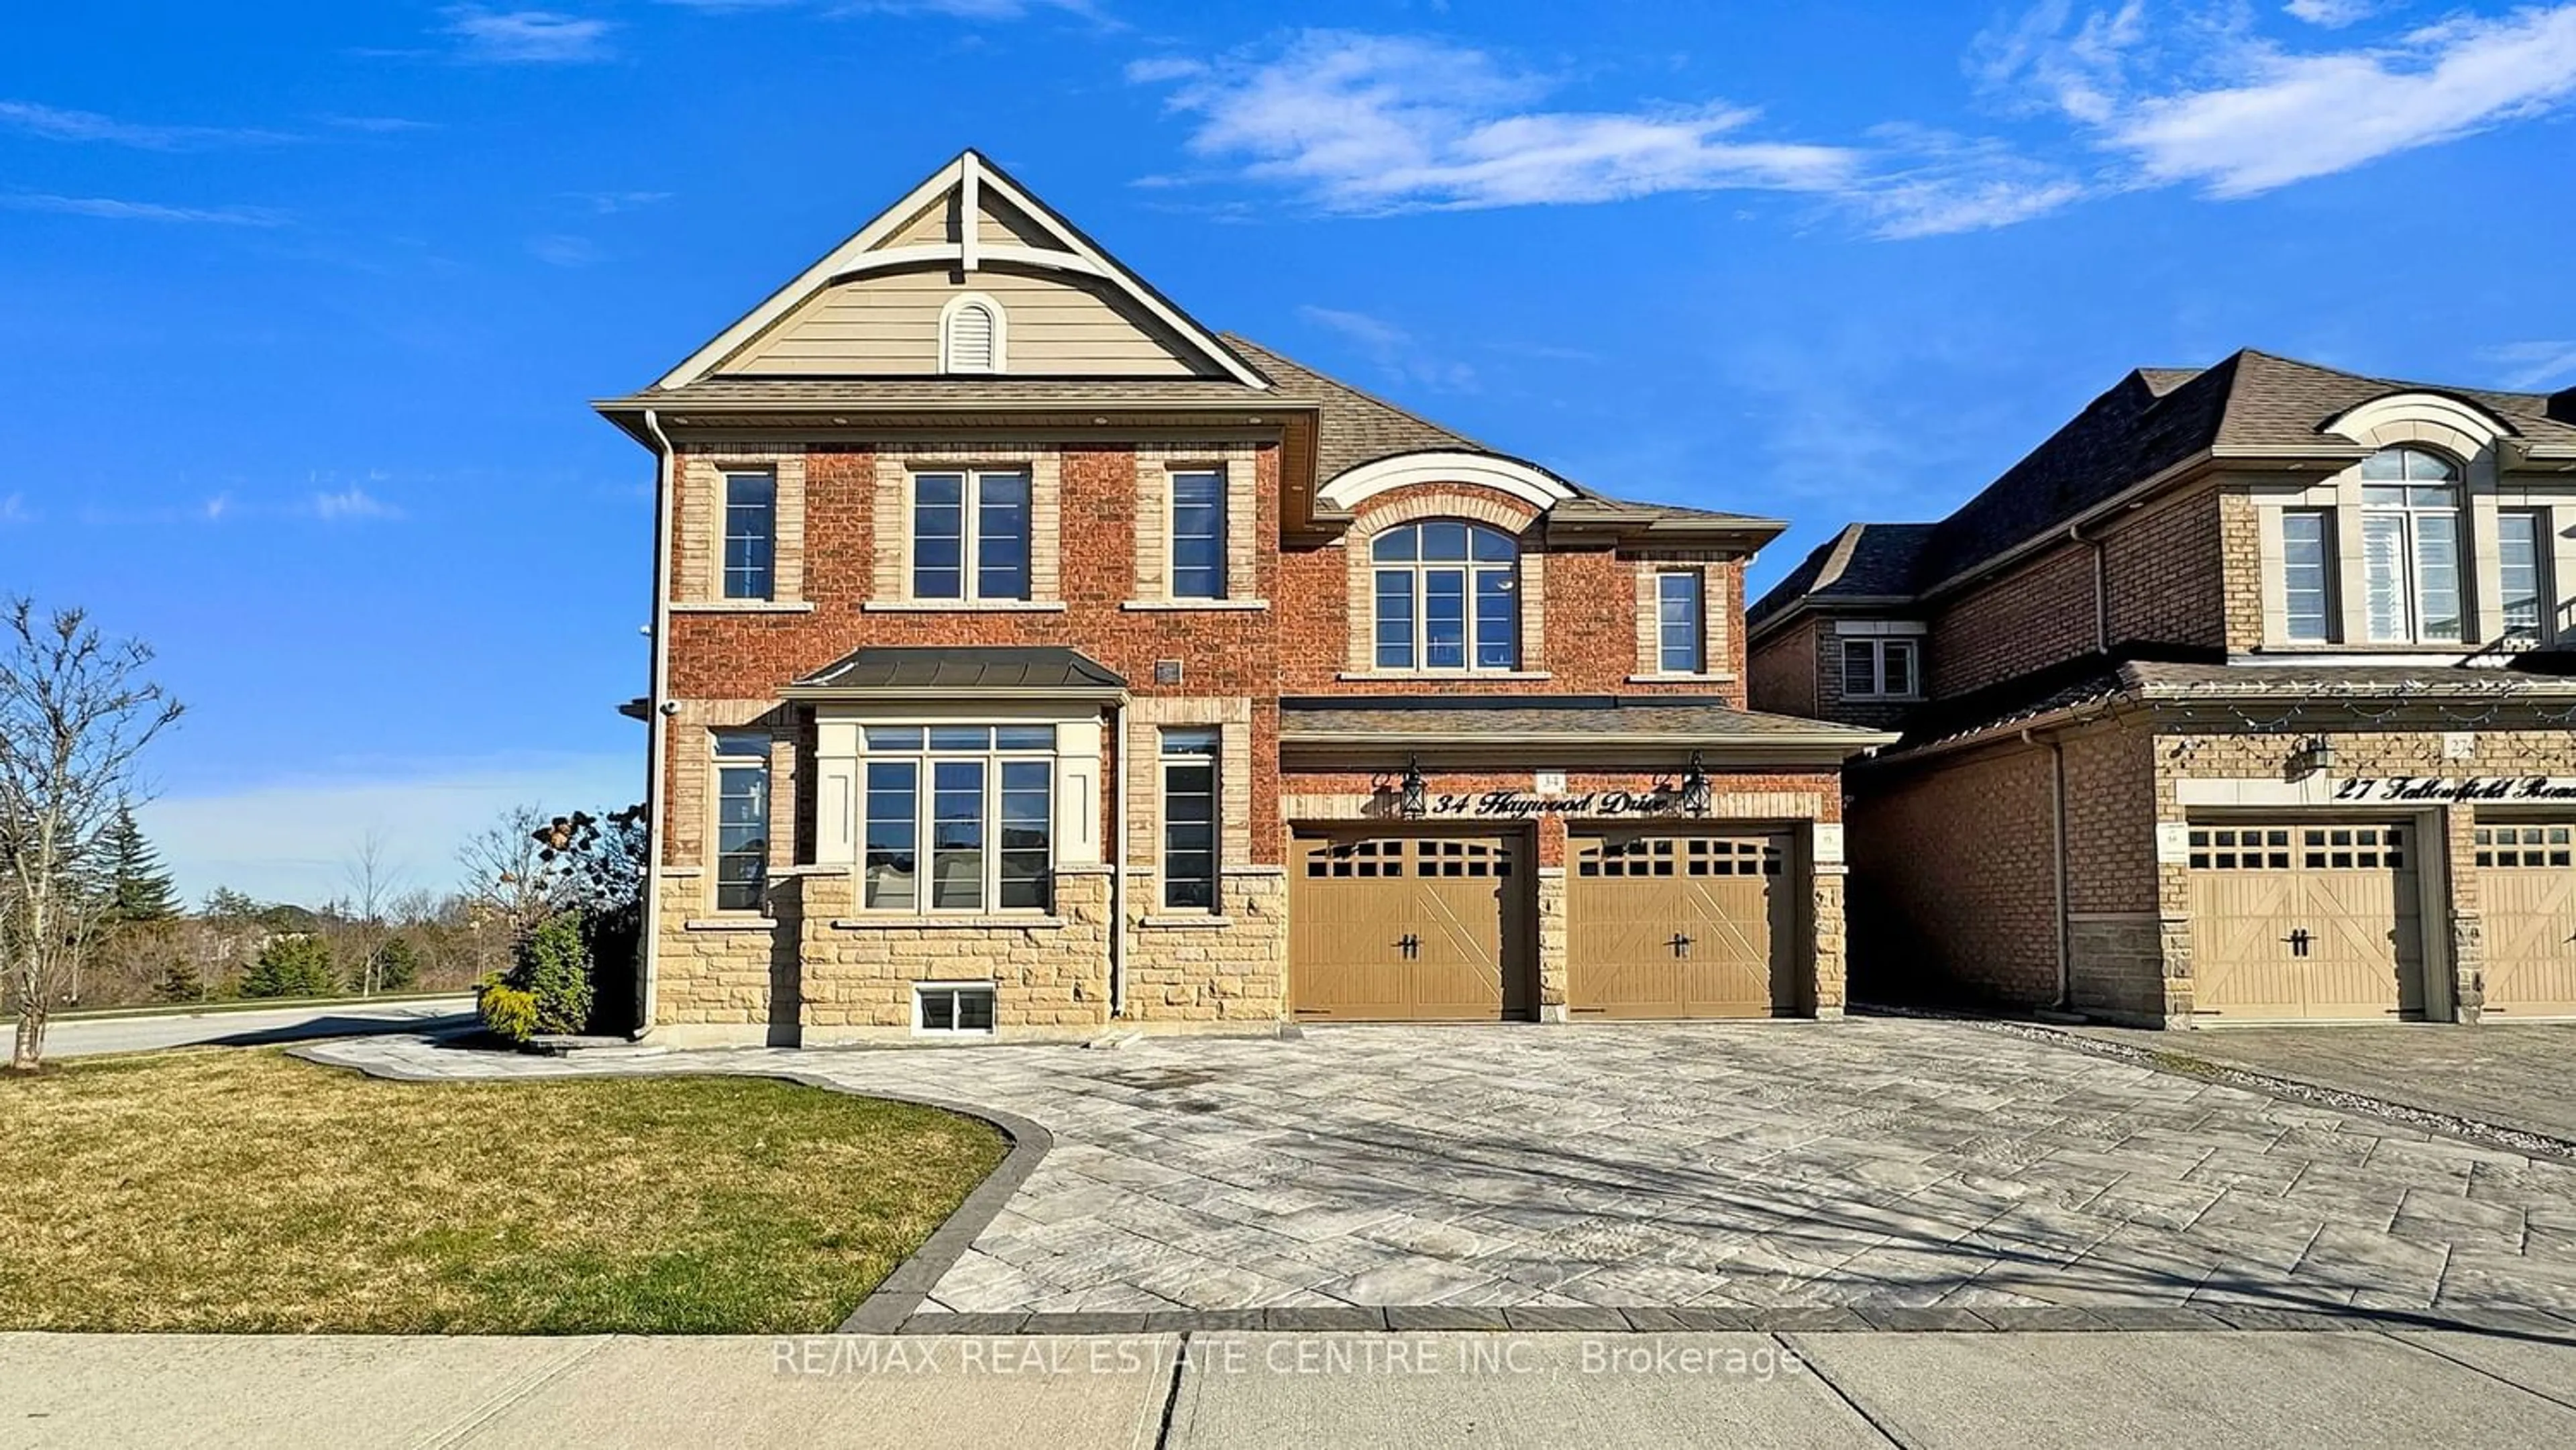 Home with brick exterior material for 34 Haywood Dr, Brampton Ontario L6X 0W3